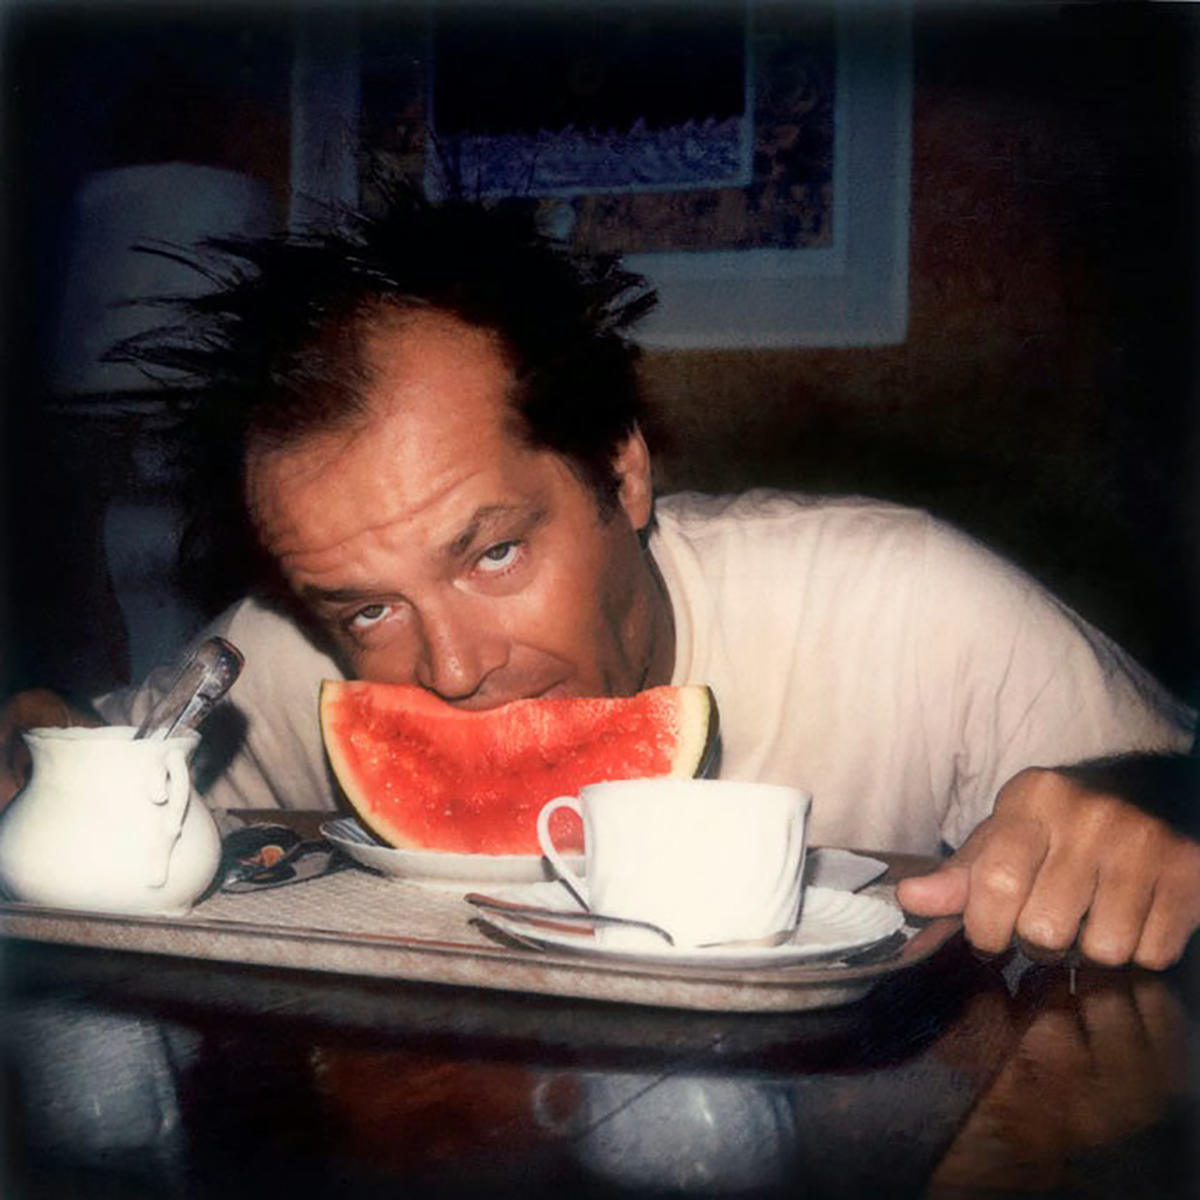 Jack Nicholson eating a watermelon, sometime in the 1970s.